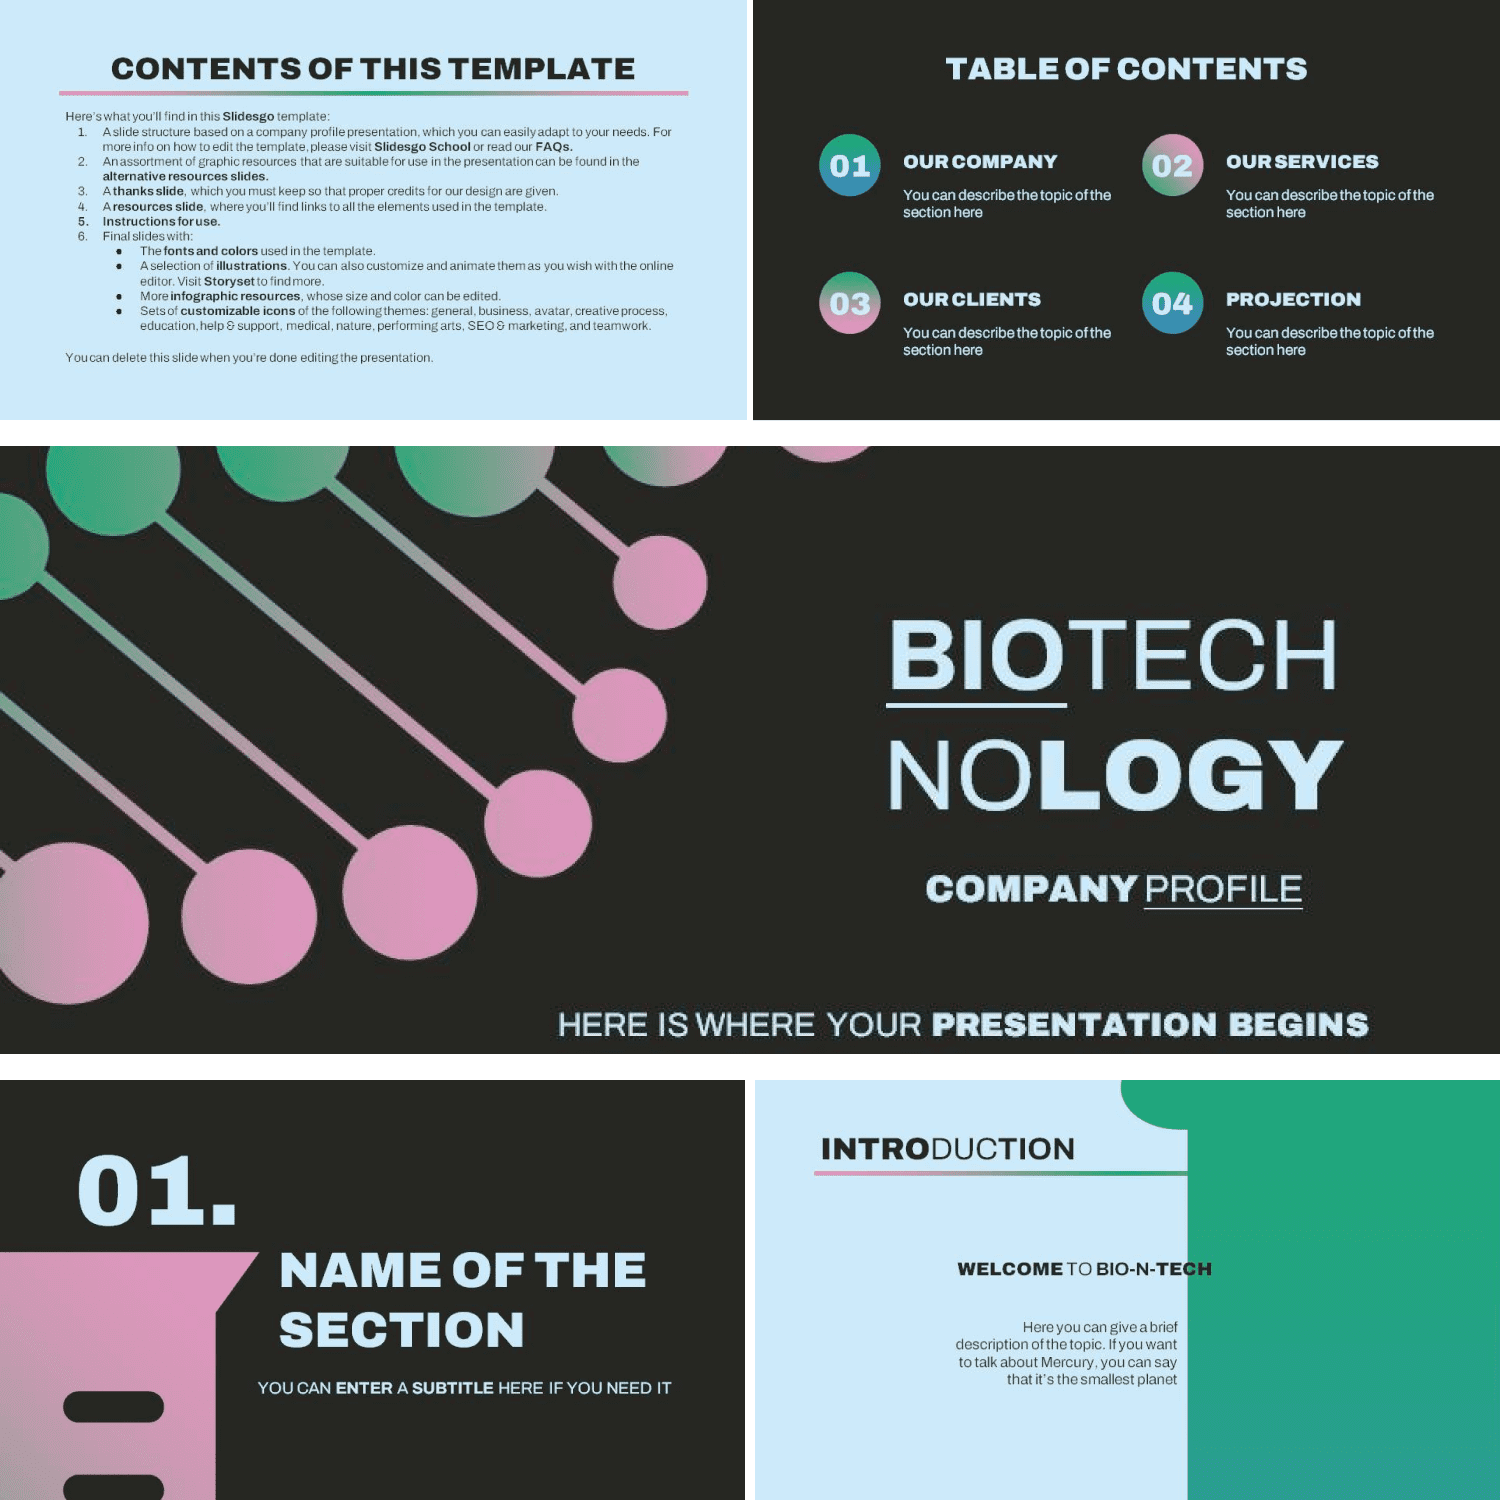 Free Biotechnology Company Profile PowerPoint Template Cover.